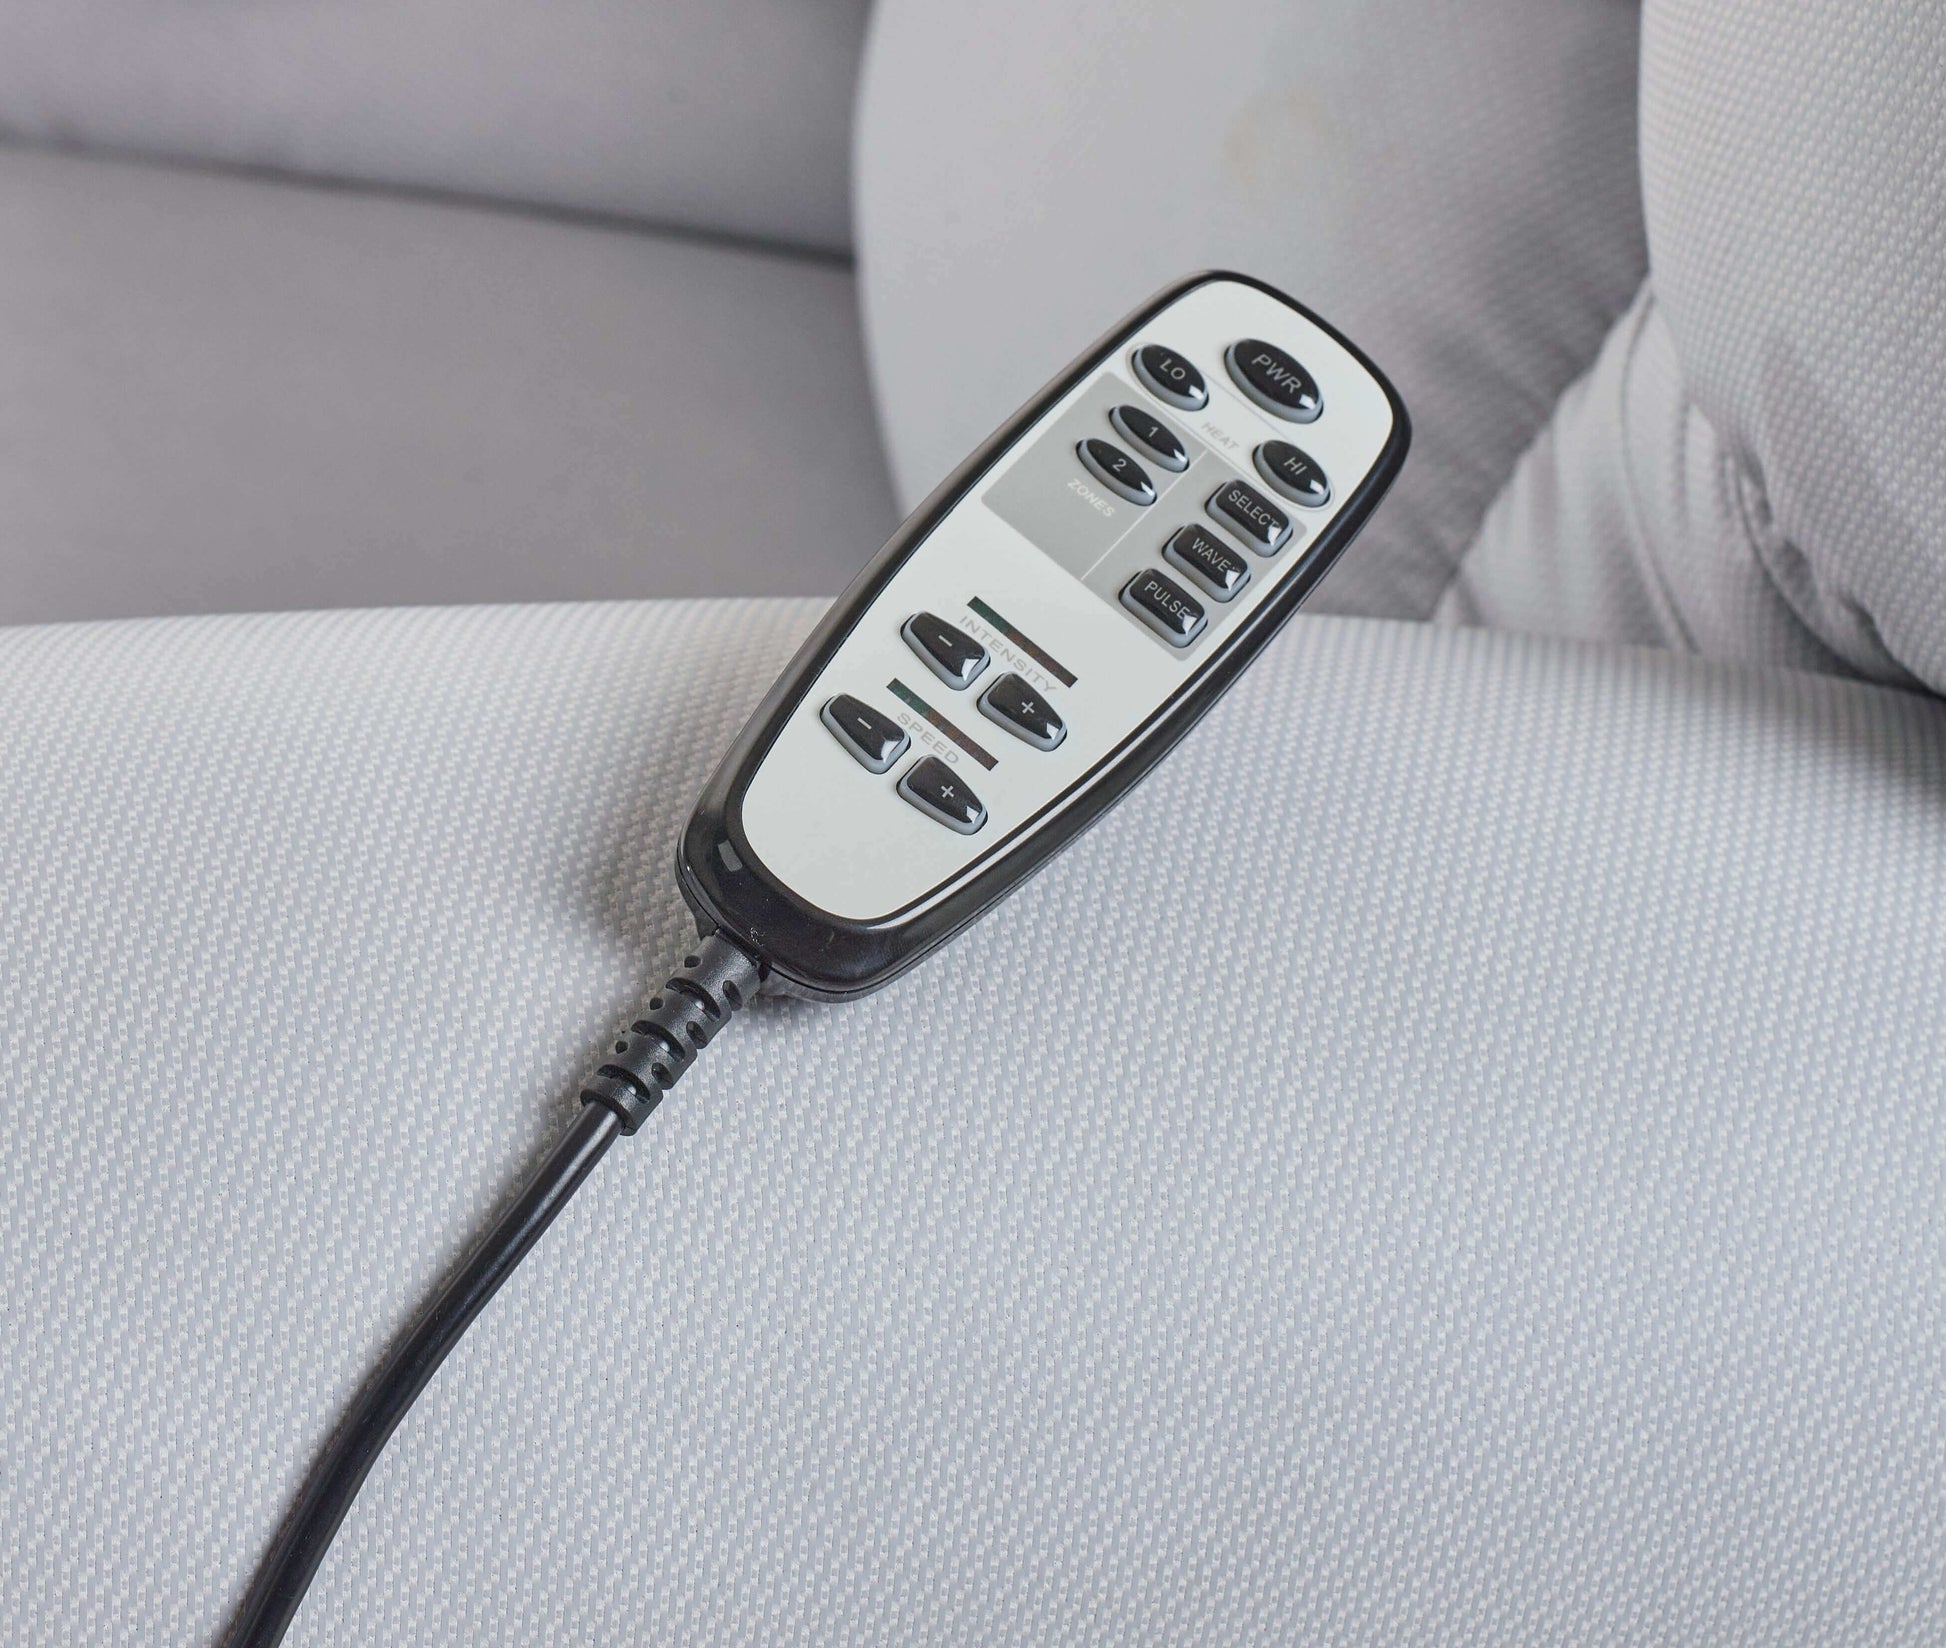 Perfect Sleep Chair remote to control heat and massage functions